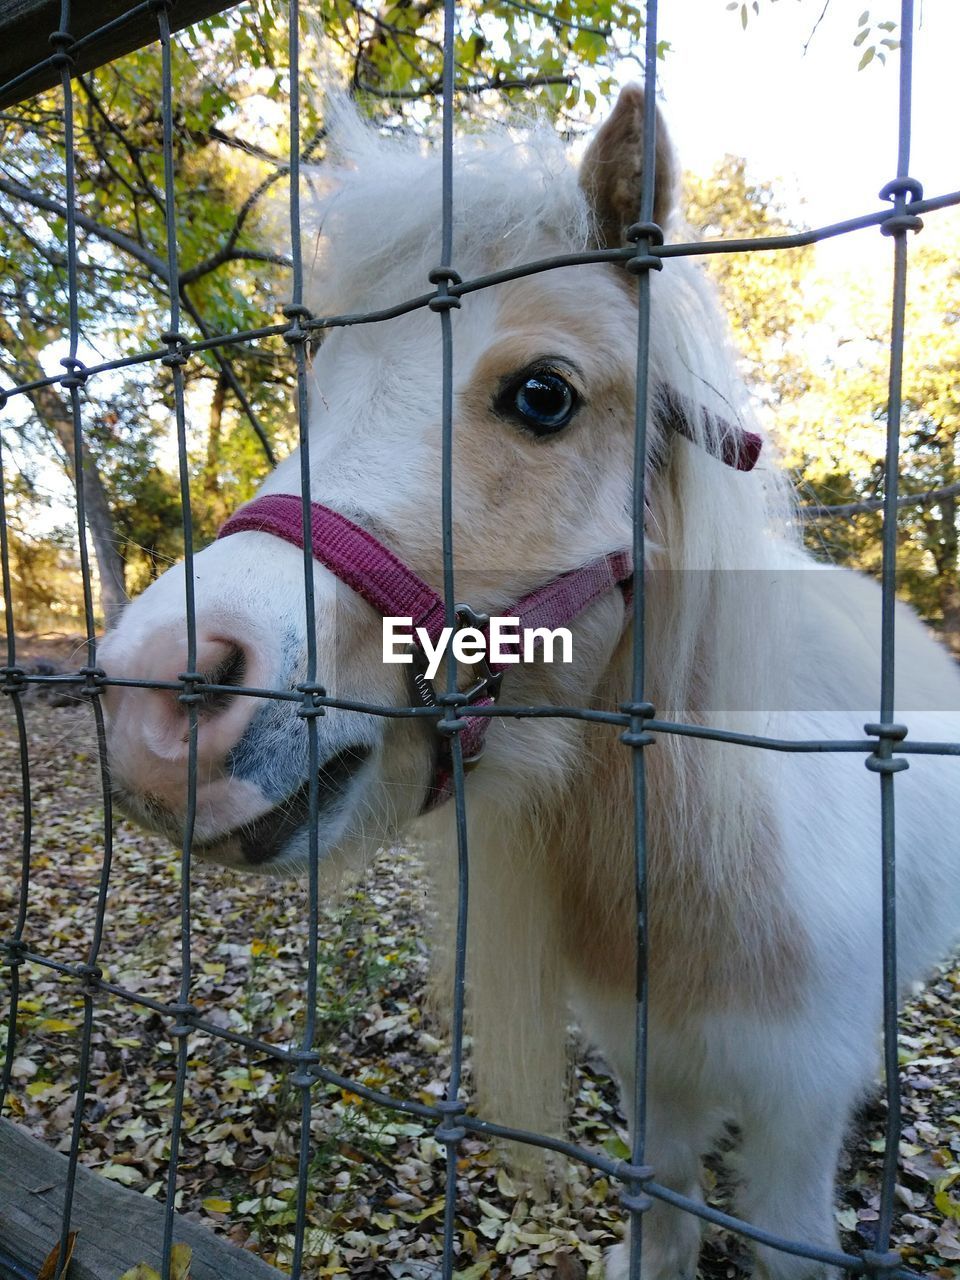 CLOSE-UP OF HORSE IN CAGE FENCE